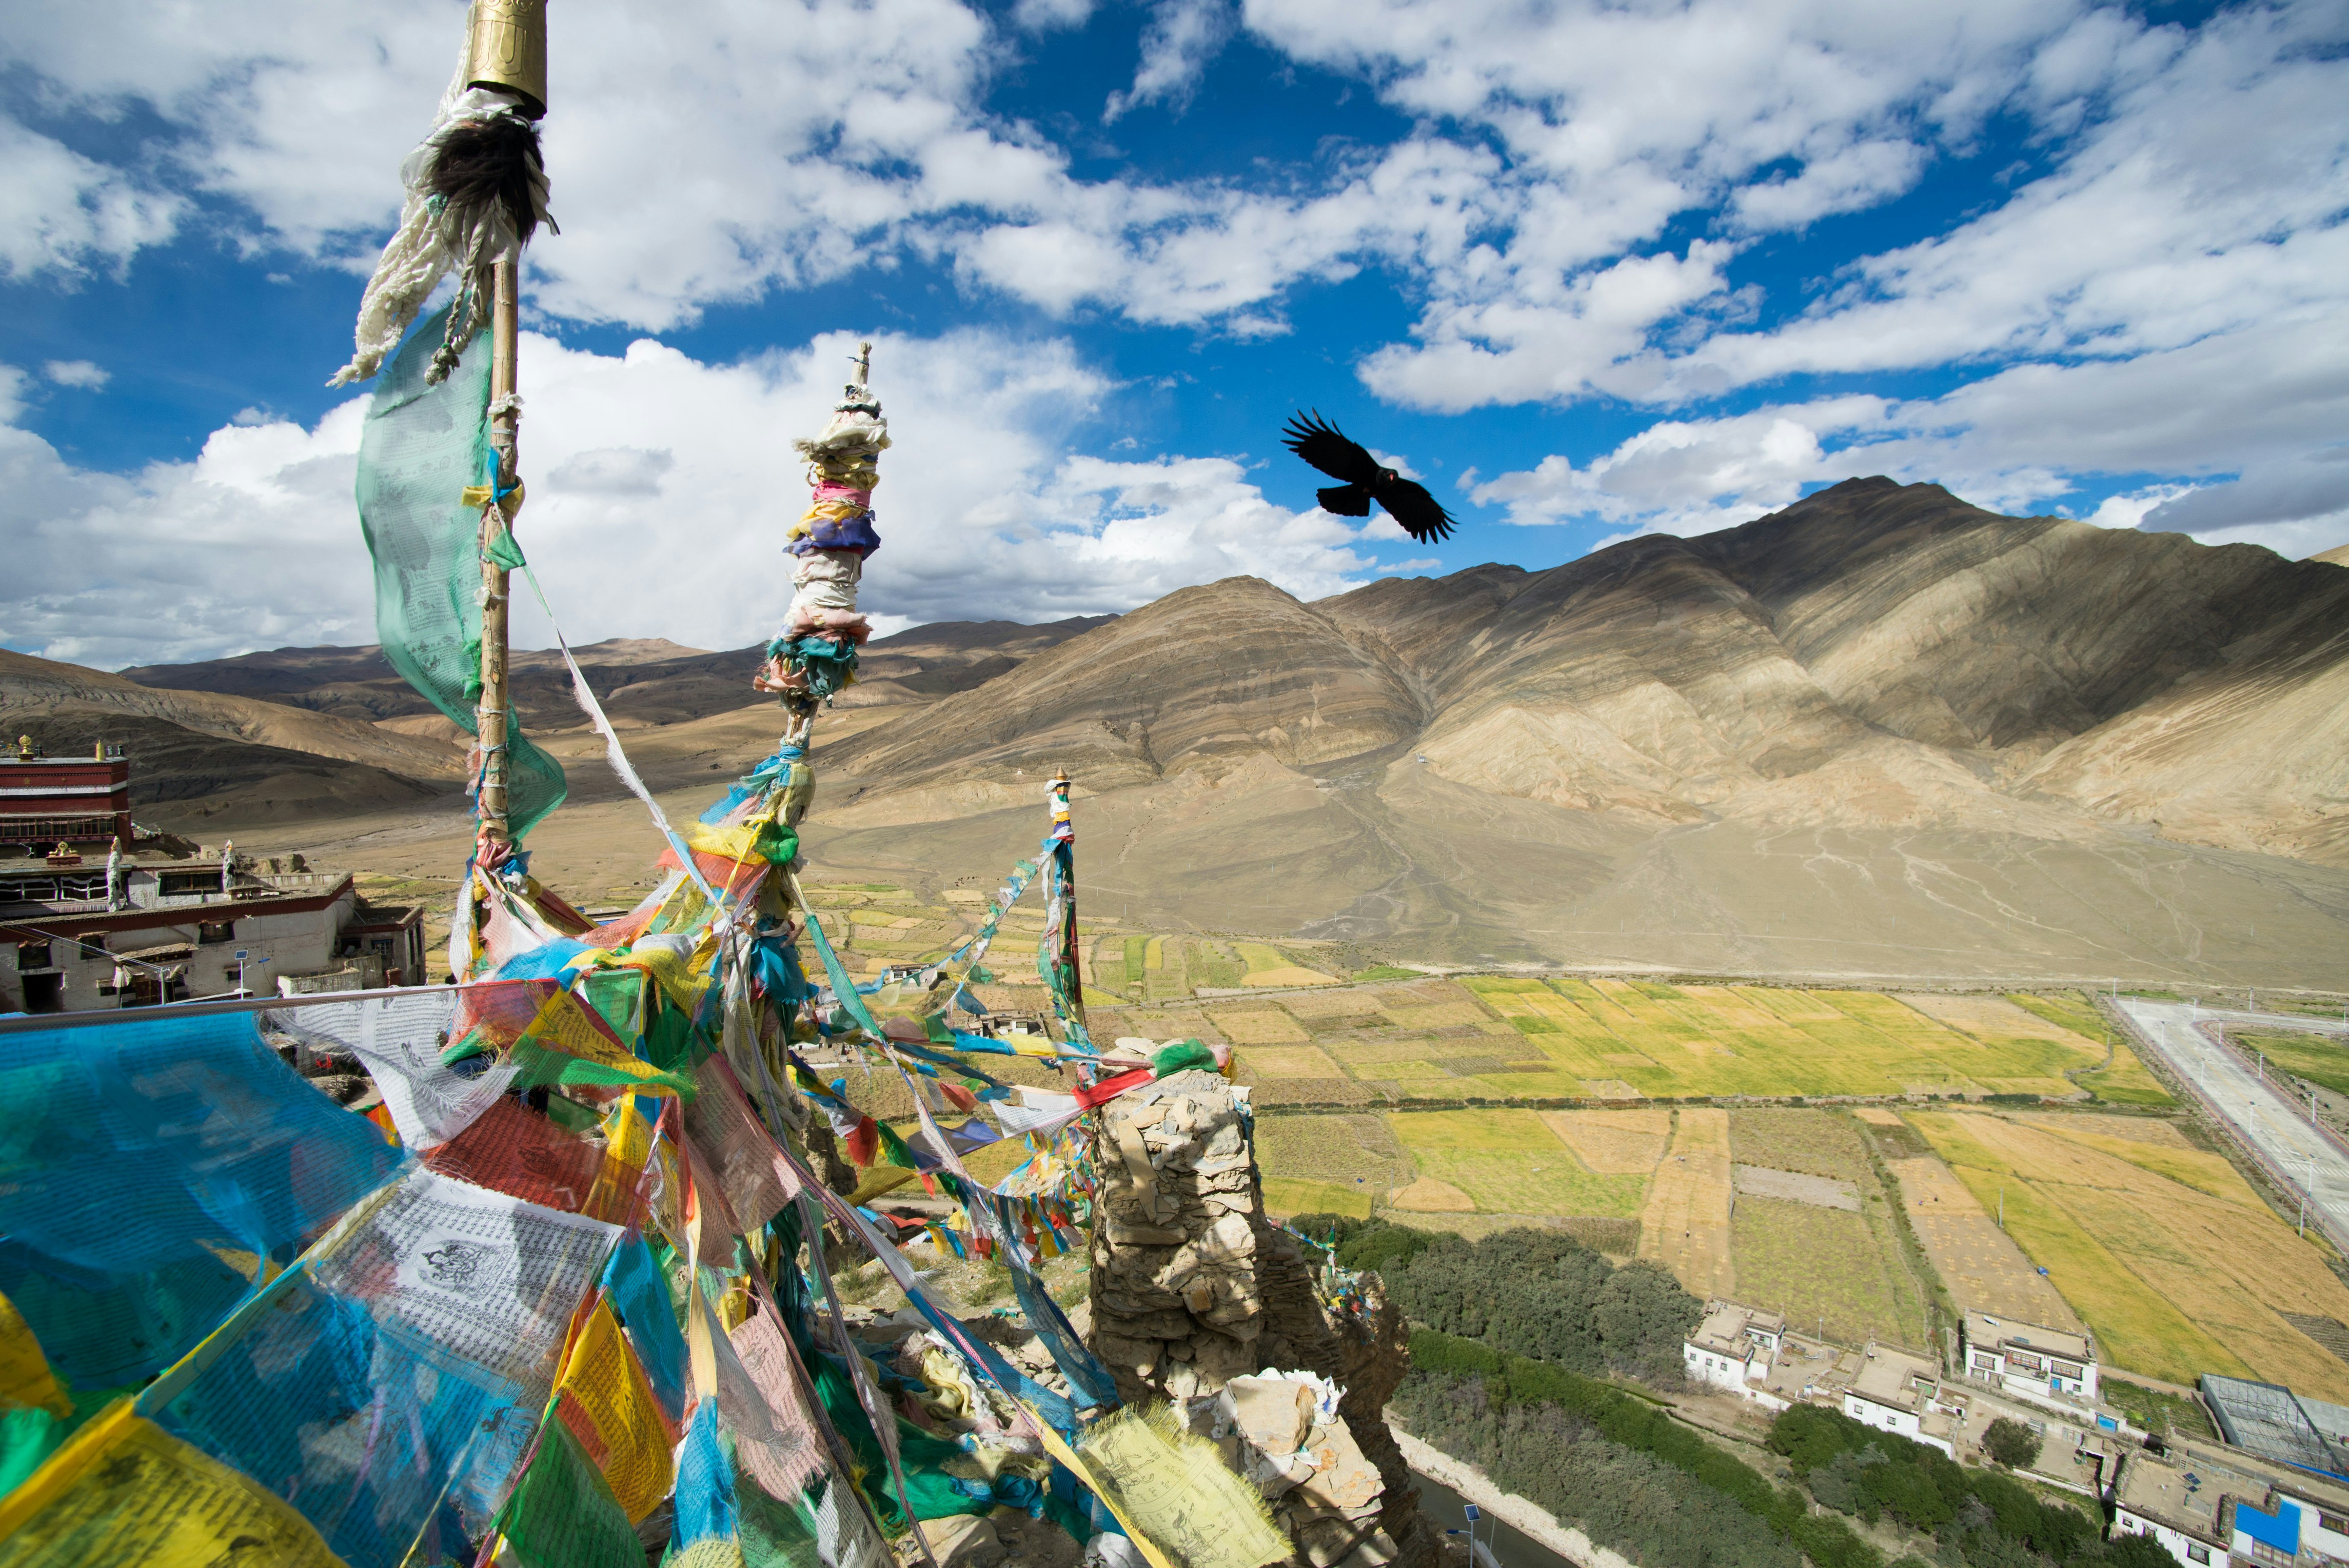 A view from above the monastery. Tibetan prayer flags adorn the top while a bird flies next to them. Mountains are in the background.